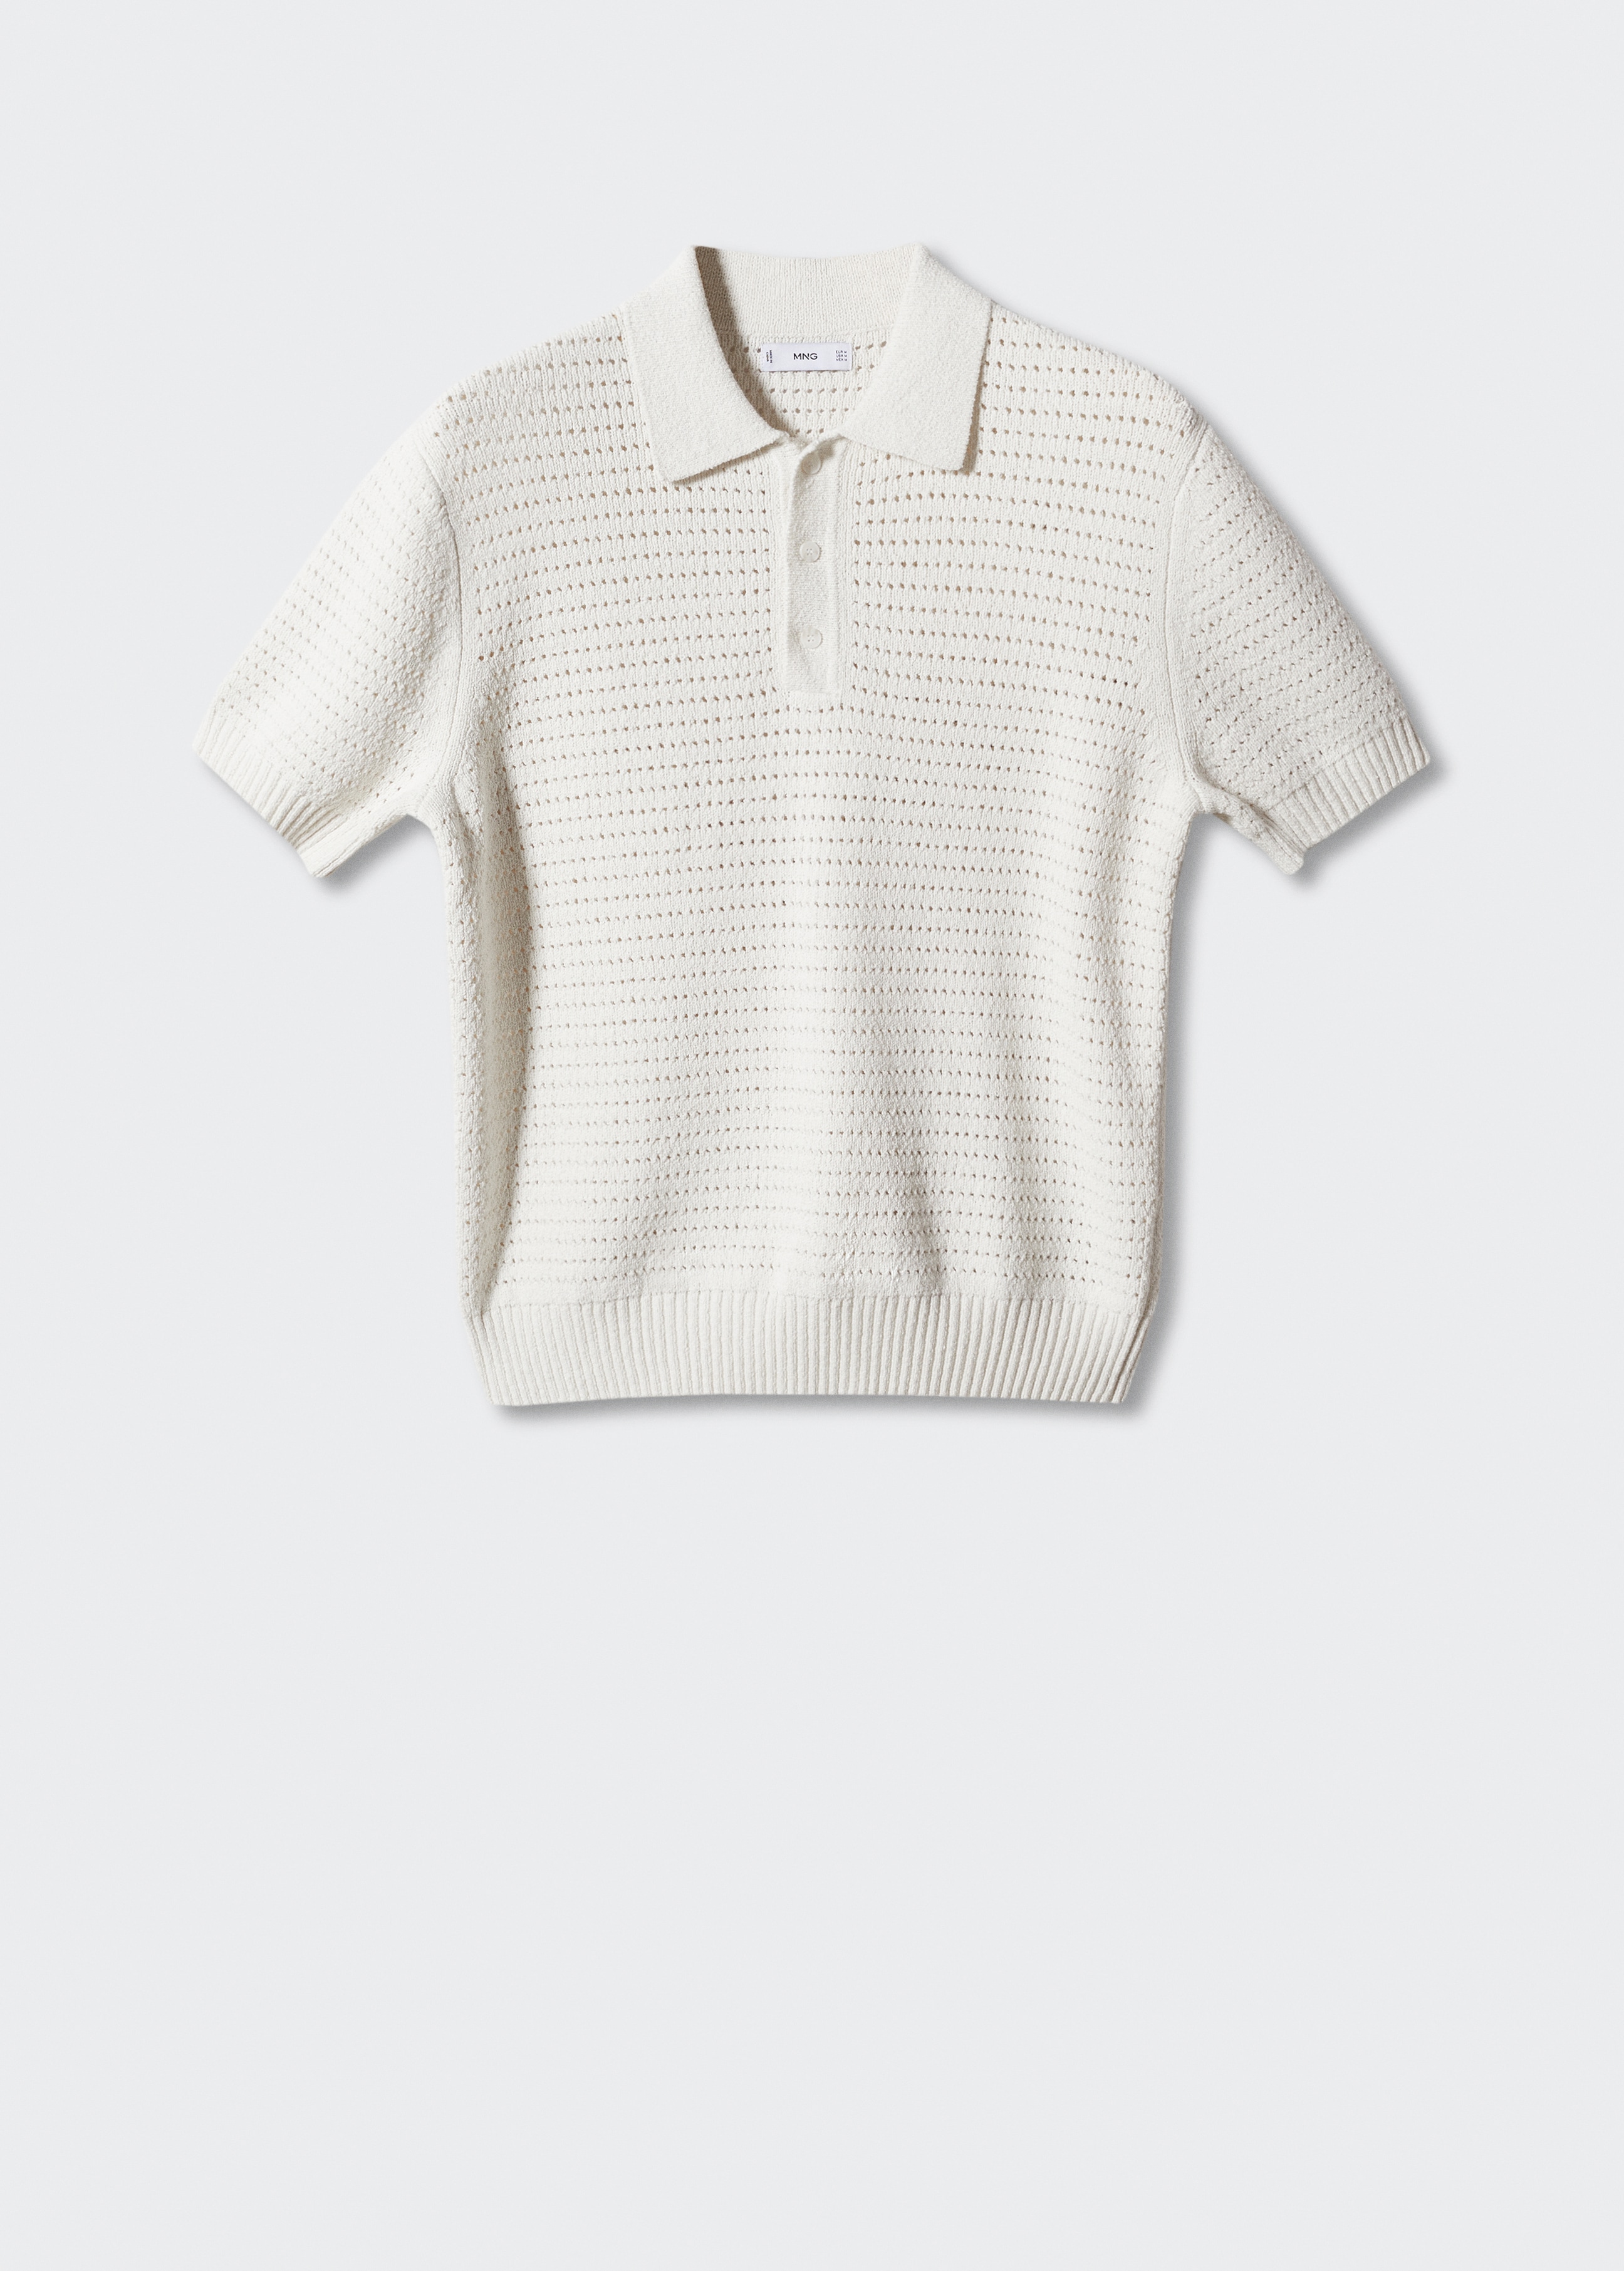 Openwork cotton knitte polo shirt  - Article without model